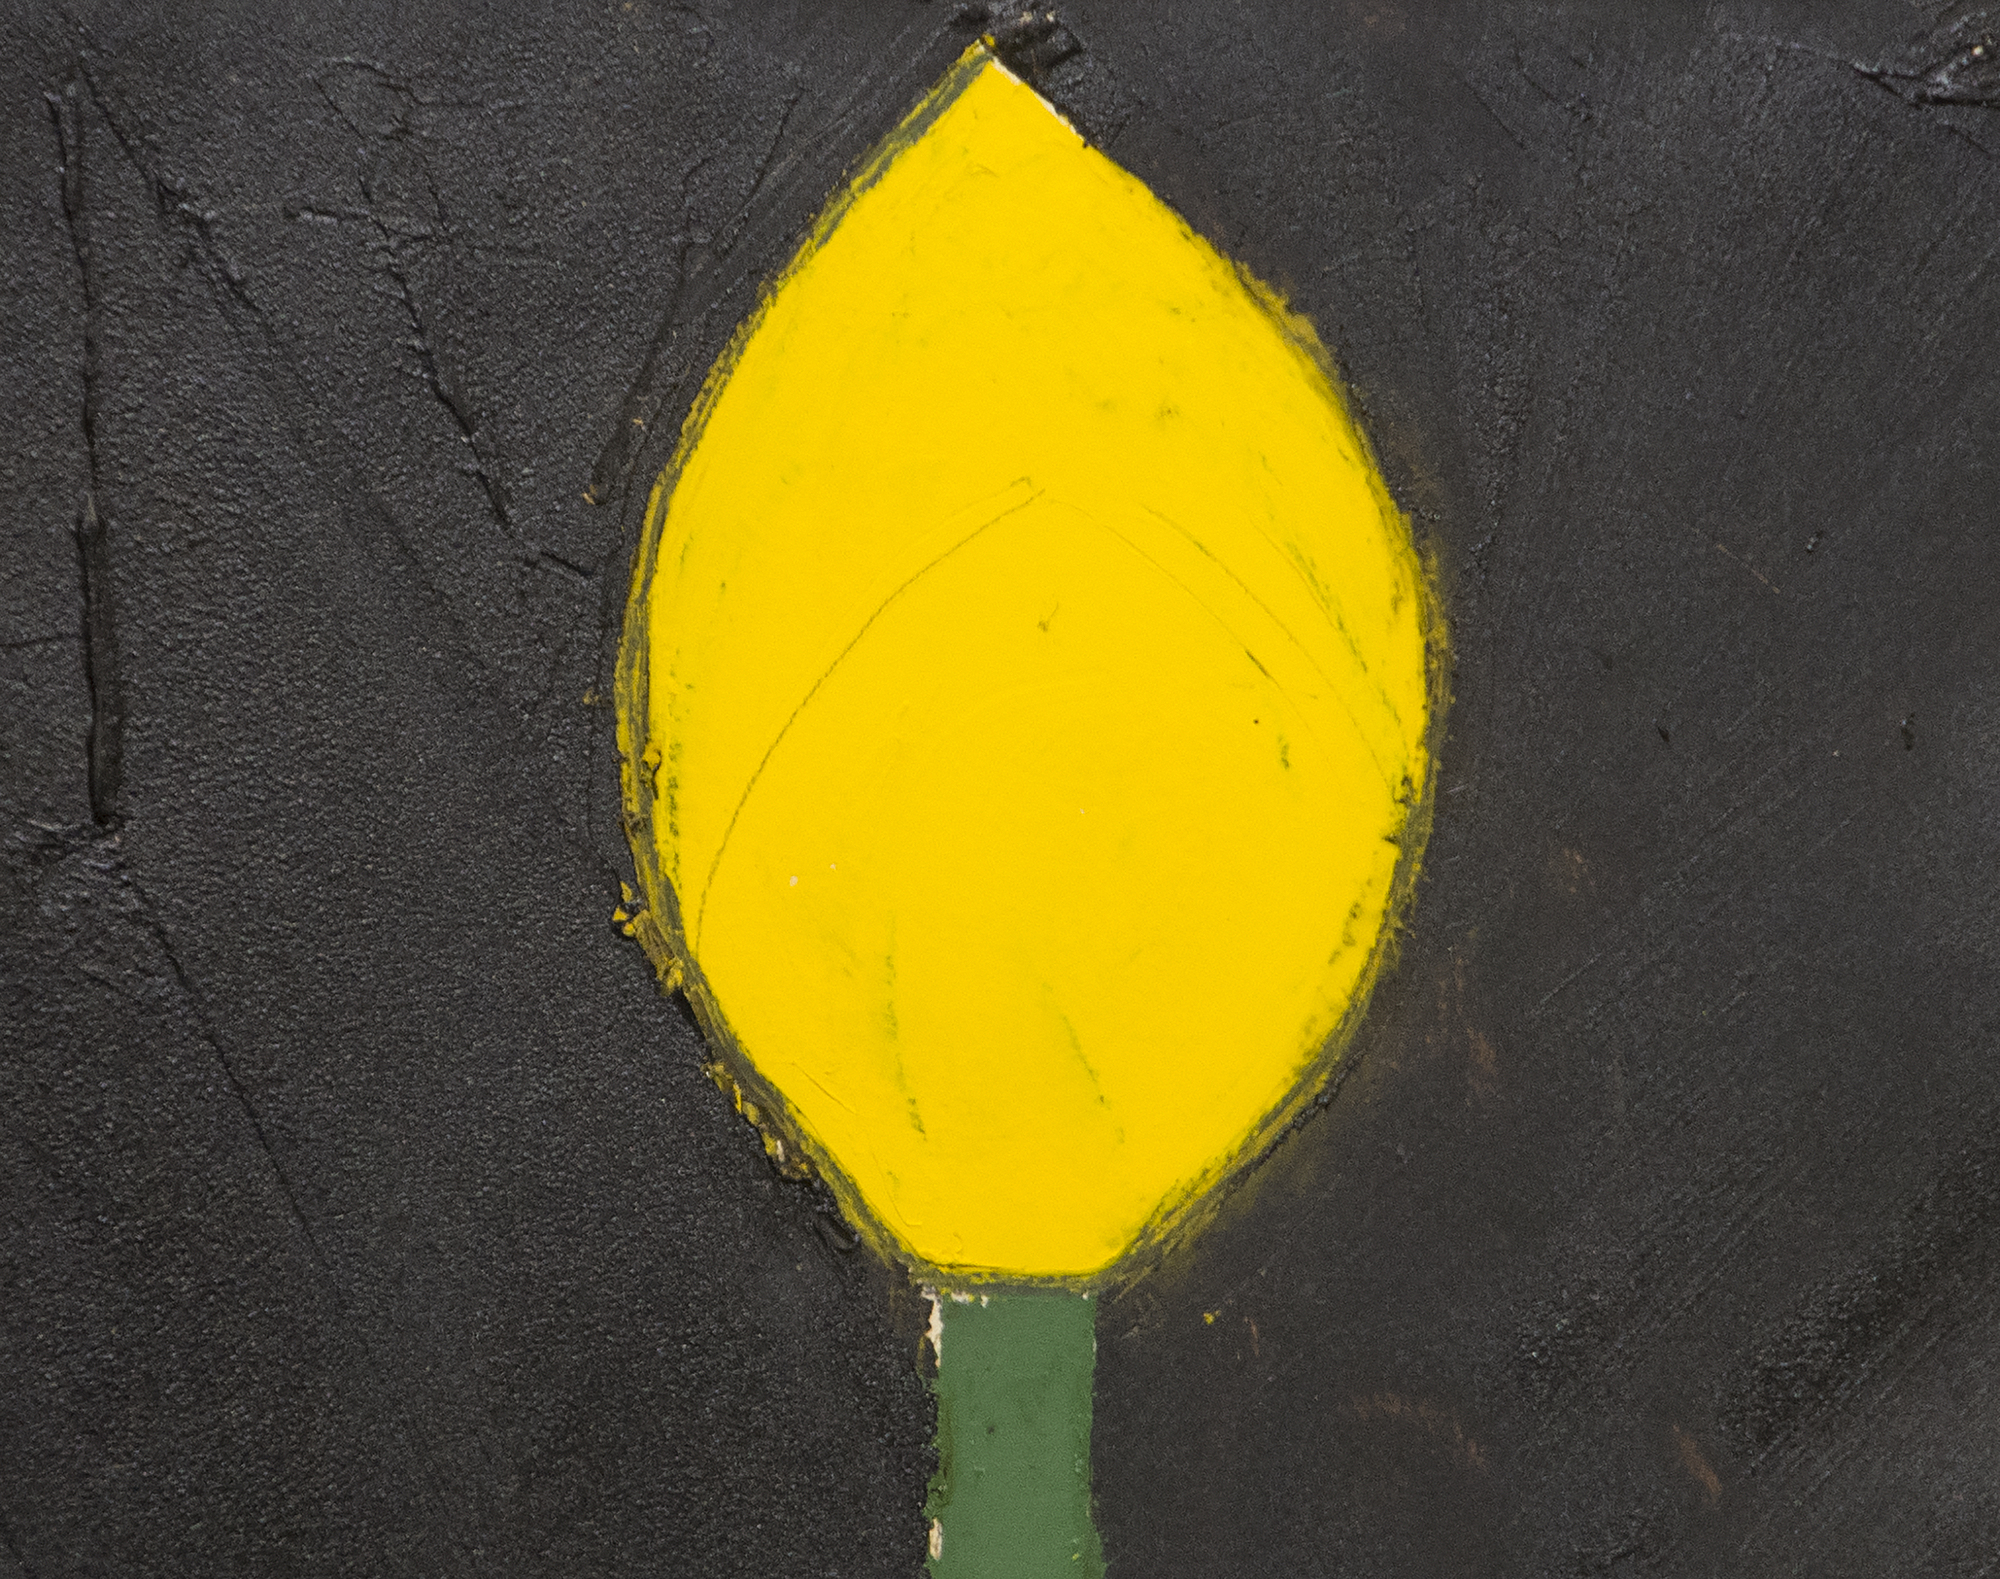 DONALD SULTAN - Yellow Tulip No. 18 - oil and tar on paper - 20 x 20 in.